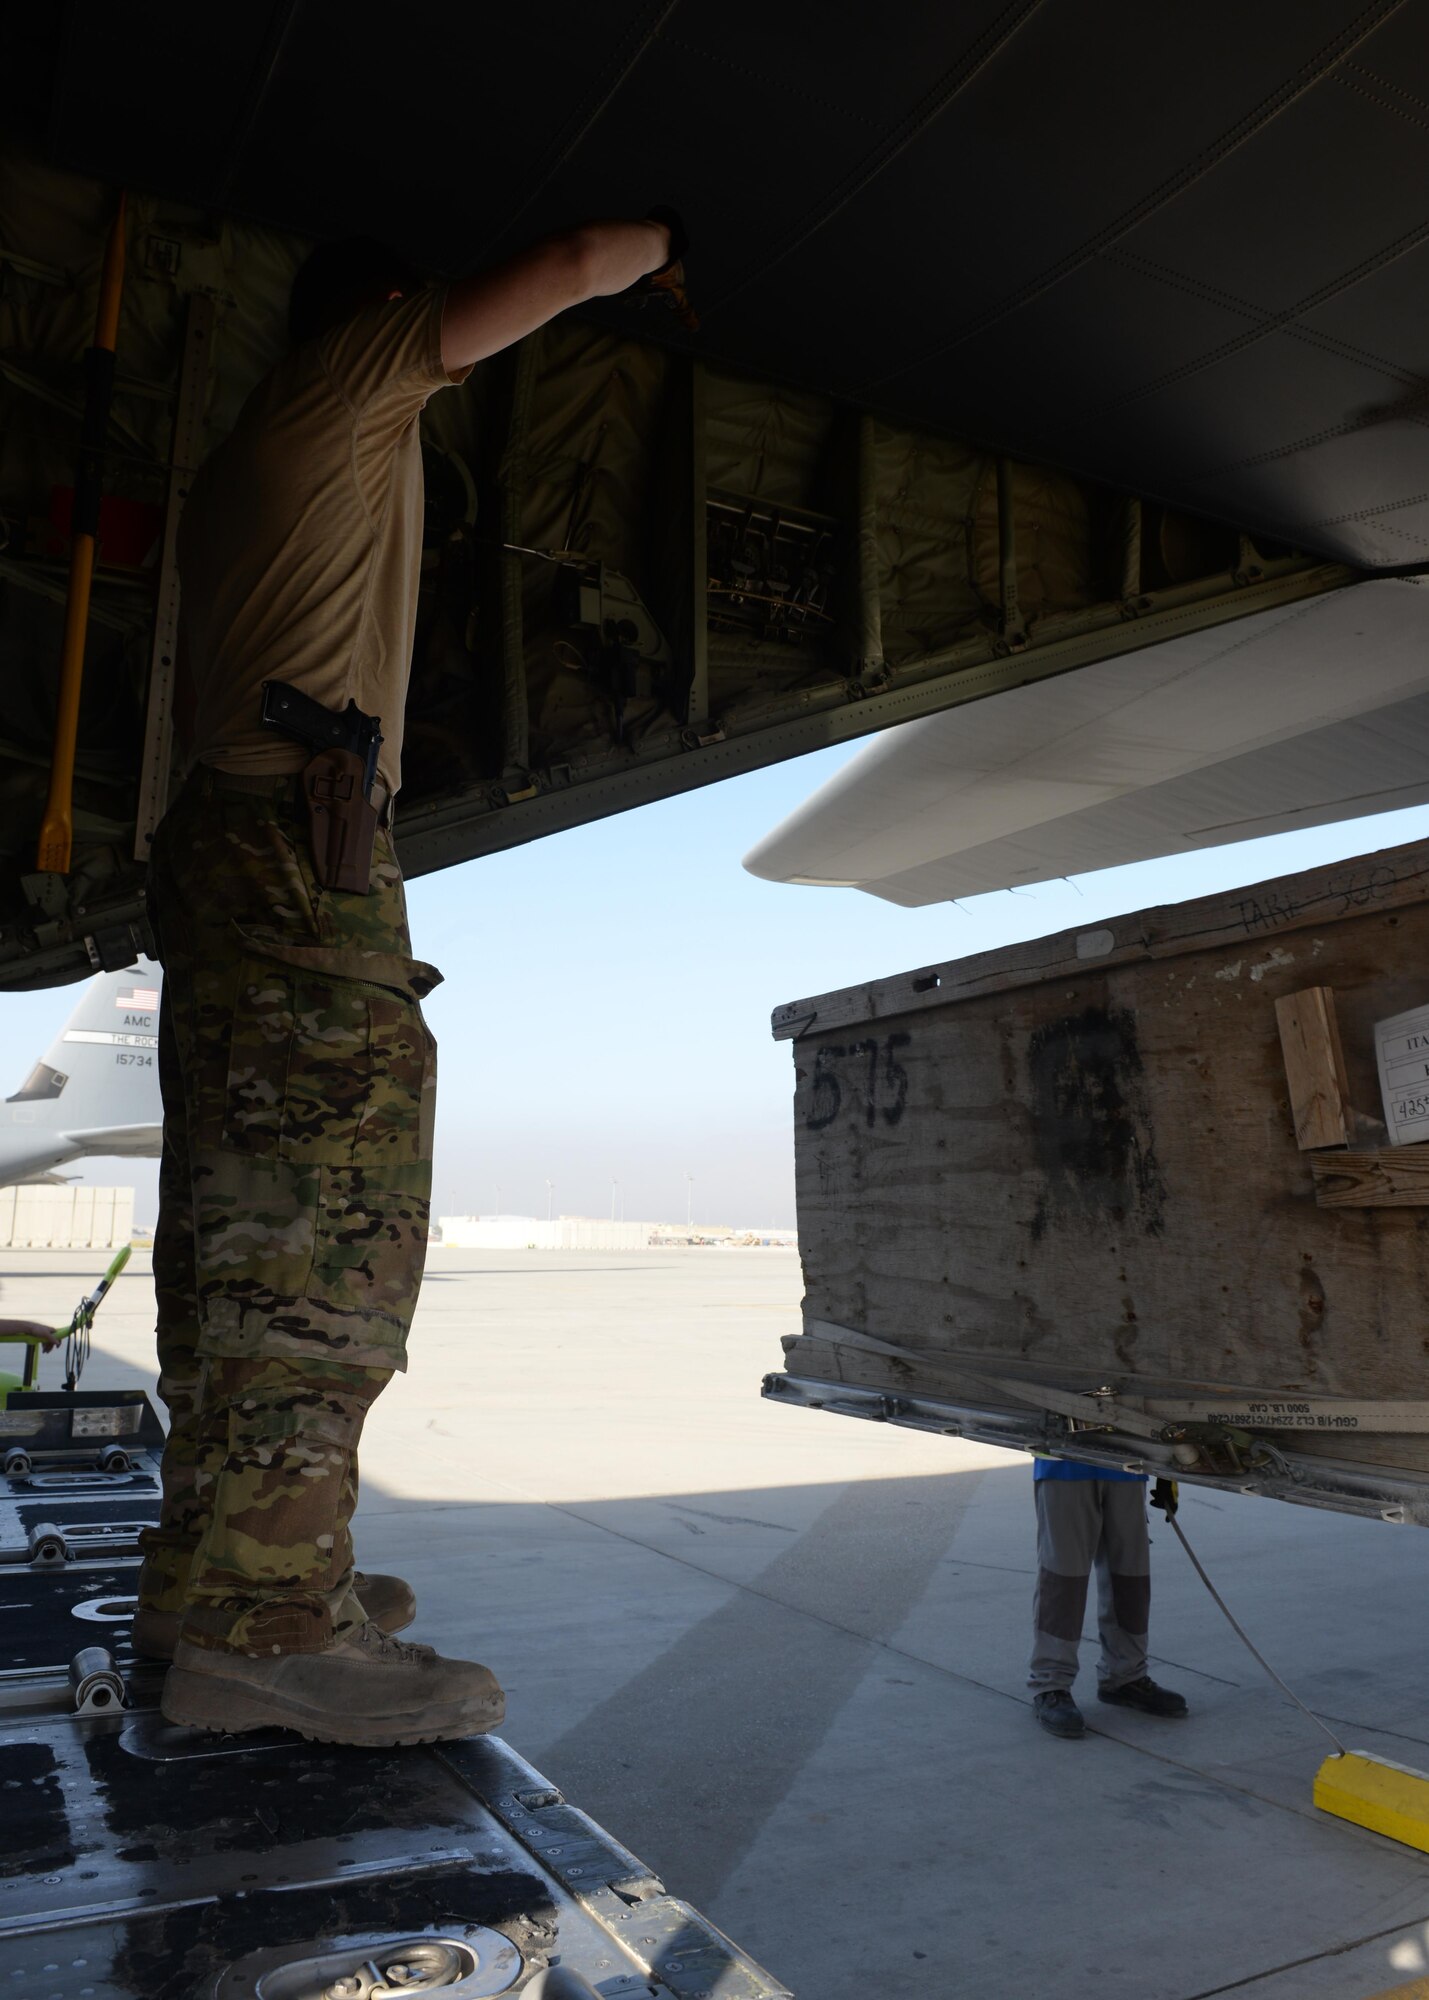 U.S. Air Force Staff Sgt. Casey Strauss, 774th Expeditionary Airlift Squadron C-130J Super Hercules loadmaster, directs a cargo truck as it moves cargo onto an aircraft Aug. 28, 2015, at Bagram Airfield, Afghanistan. Strauss and his fellow loadmasters are responsible for loading and unloading cargo, passenger safety in flight, and ensuring the aircraft stays within the proper weight and balance limitations. (U.S. Air Force photo by Senior Airman Cierra Presentado/Released)